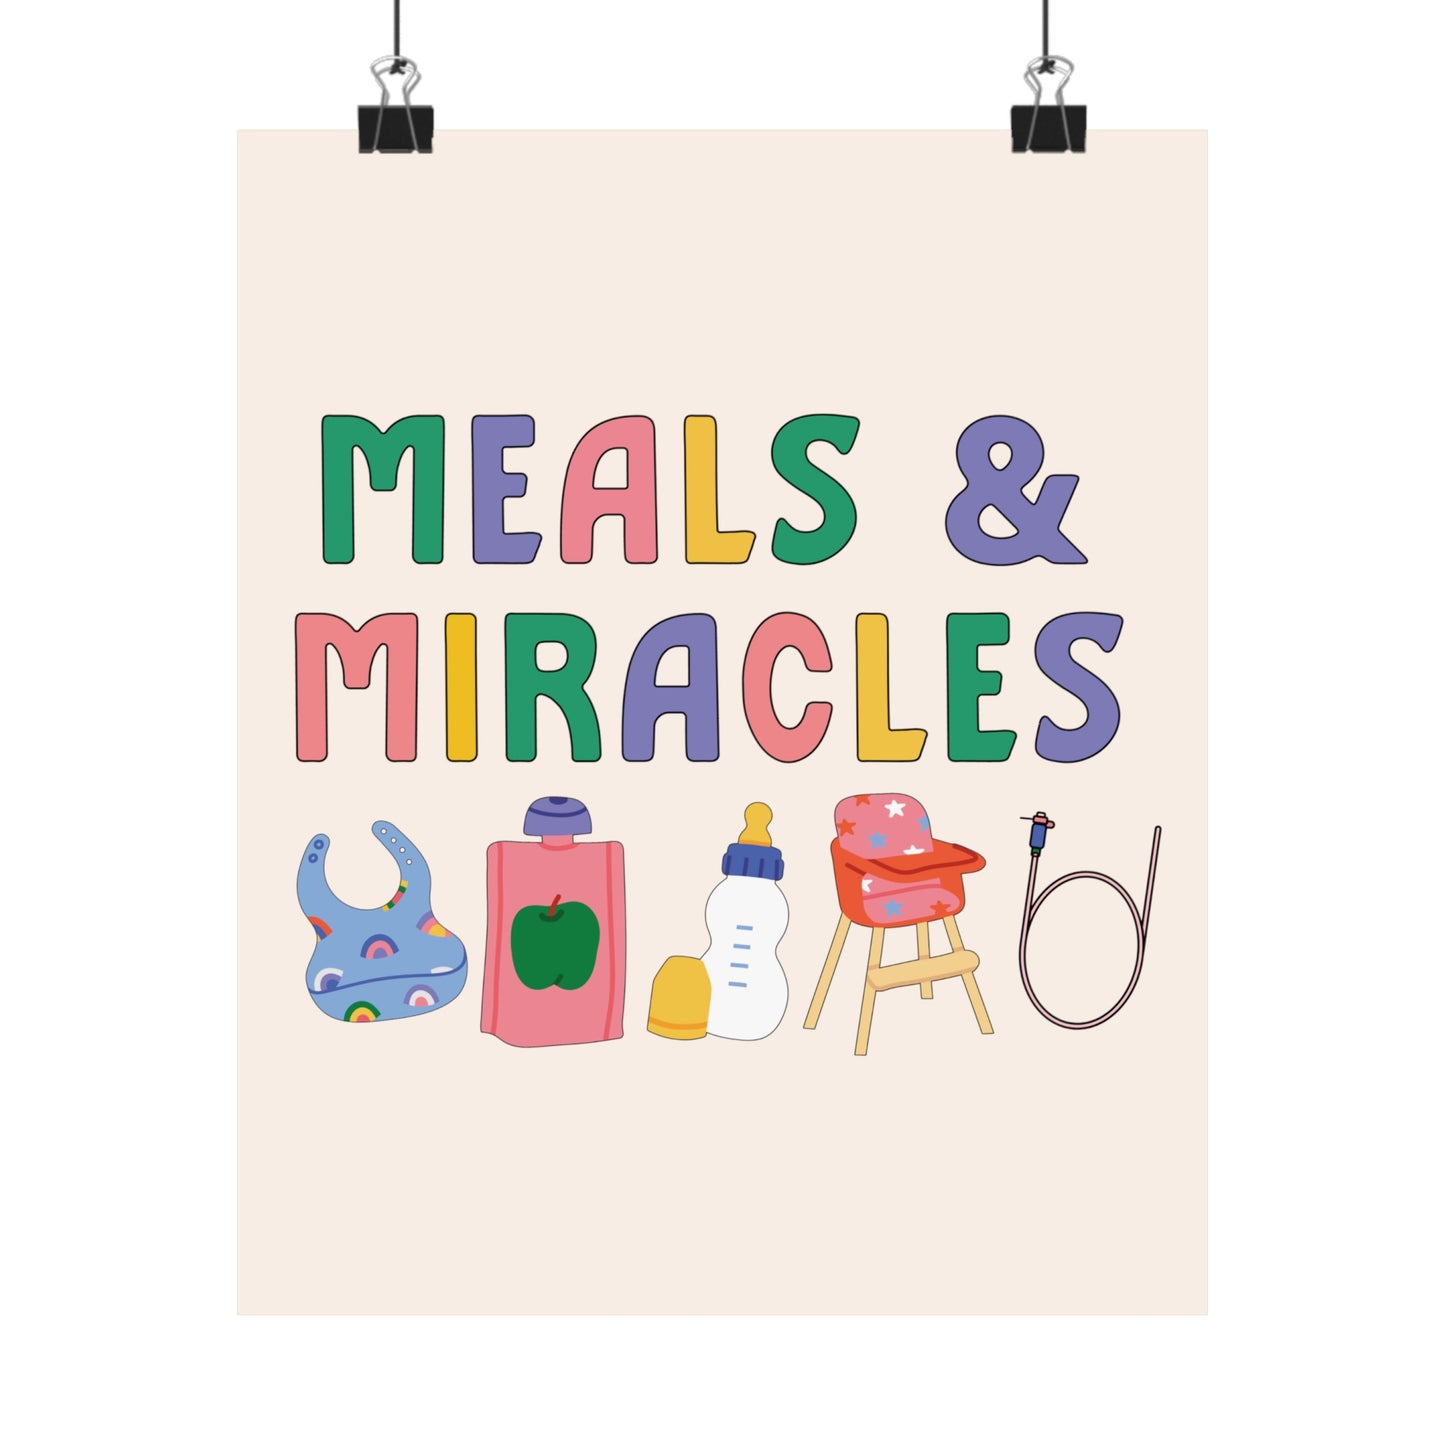 Meals and Miracles Poster